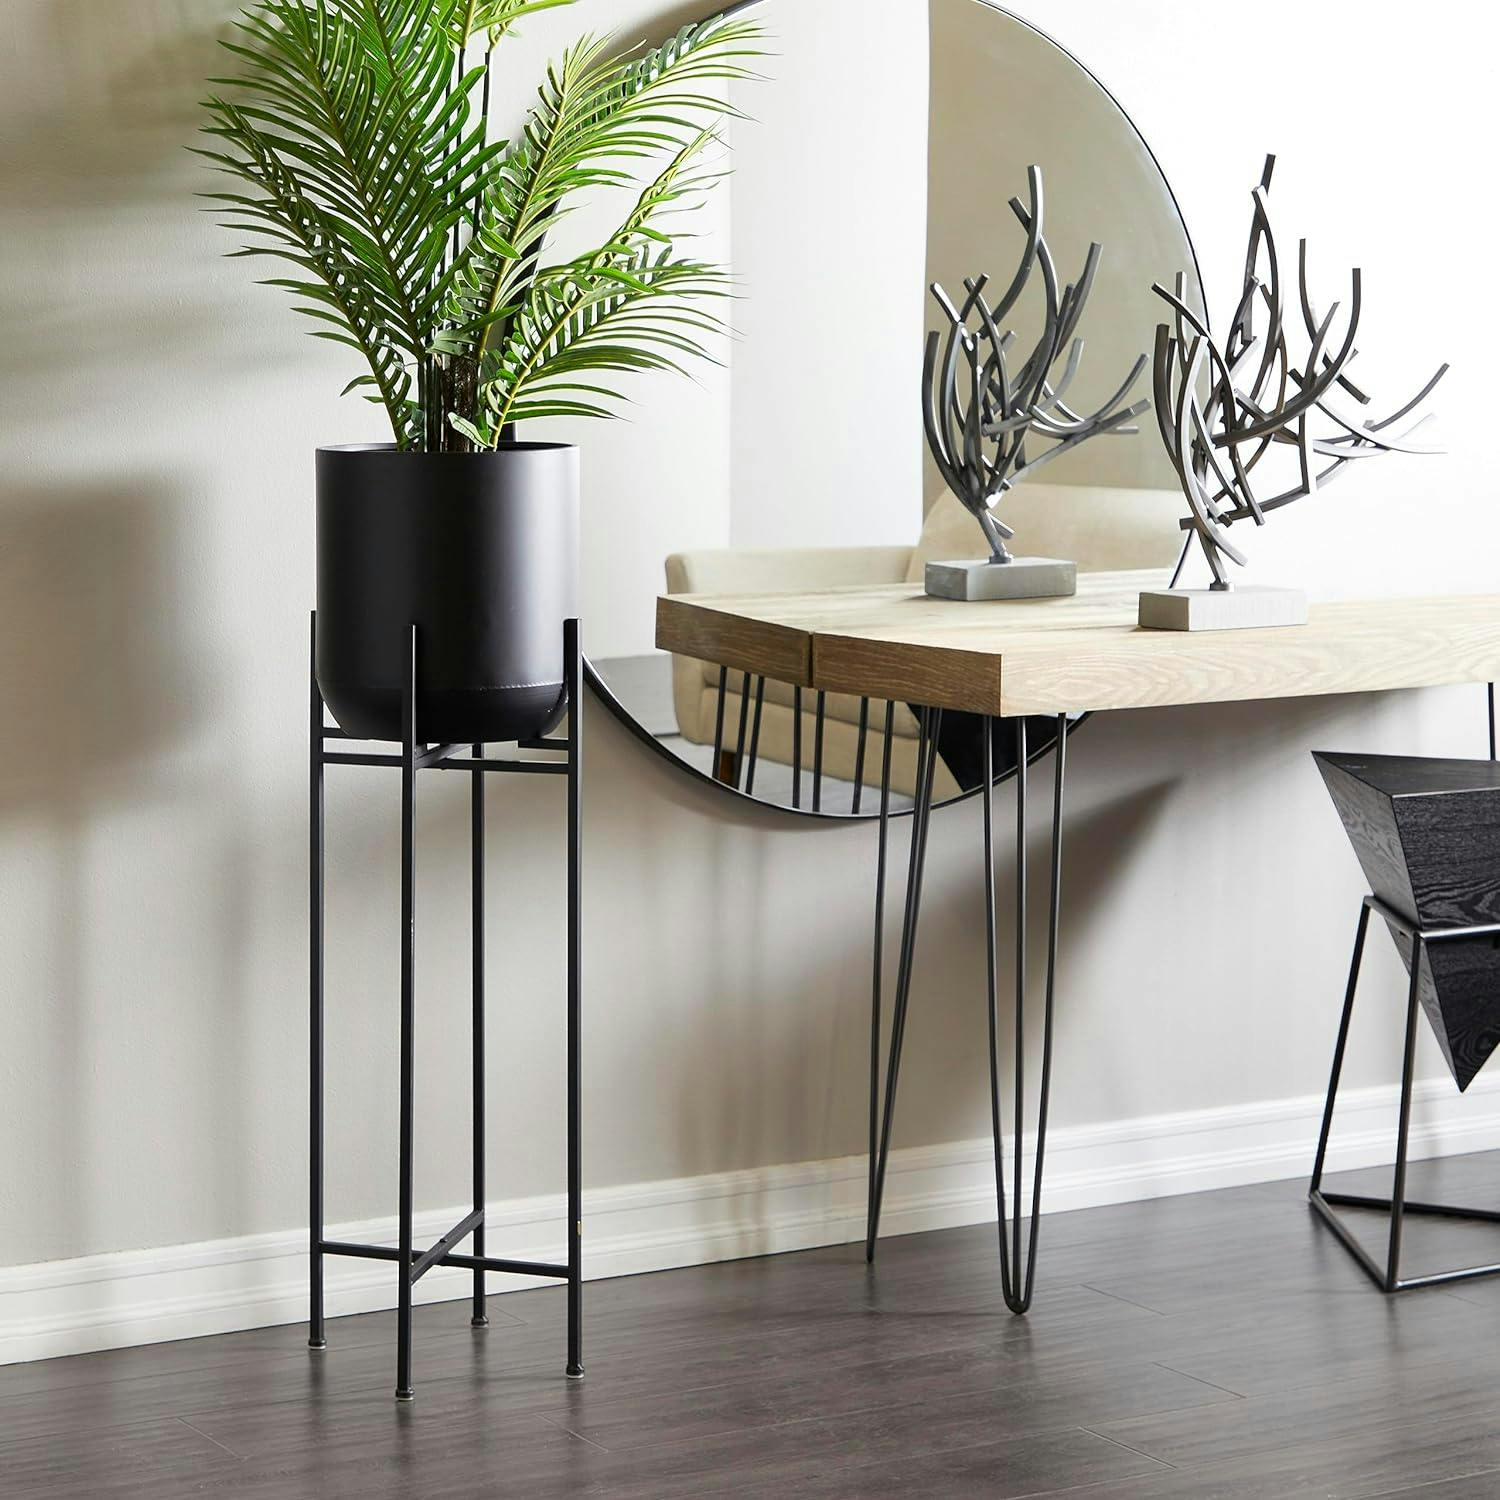 Modern Capsule-Shaped Black Iron Floor Planter with Stand